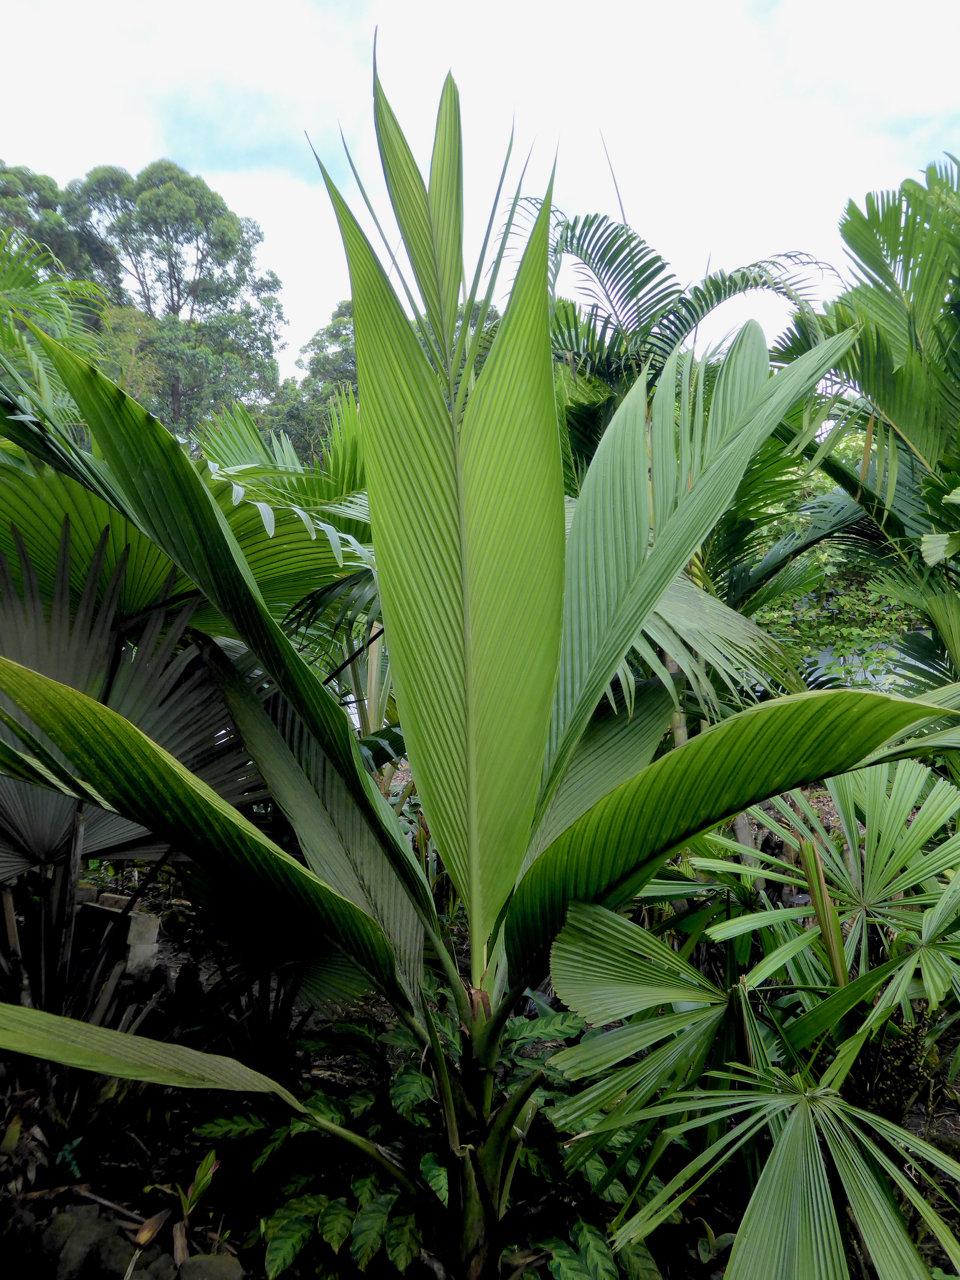 Photos: Tim Brian South Pacific Beauty This beautiful palm is endemic to the island of Viti Levu, Fiji. It is found on the slopes of Fiji's tallest mountain, Mt.